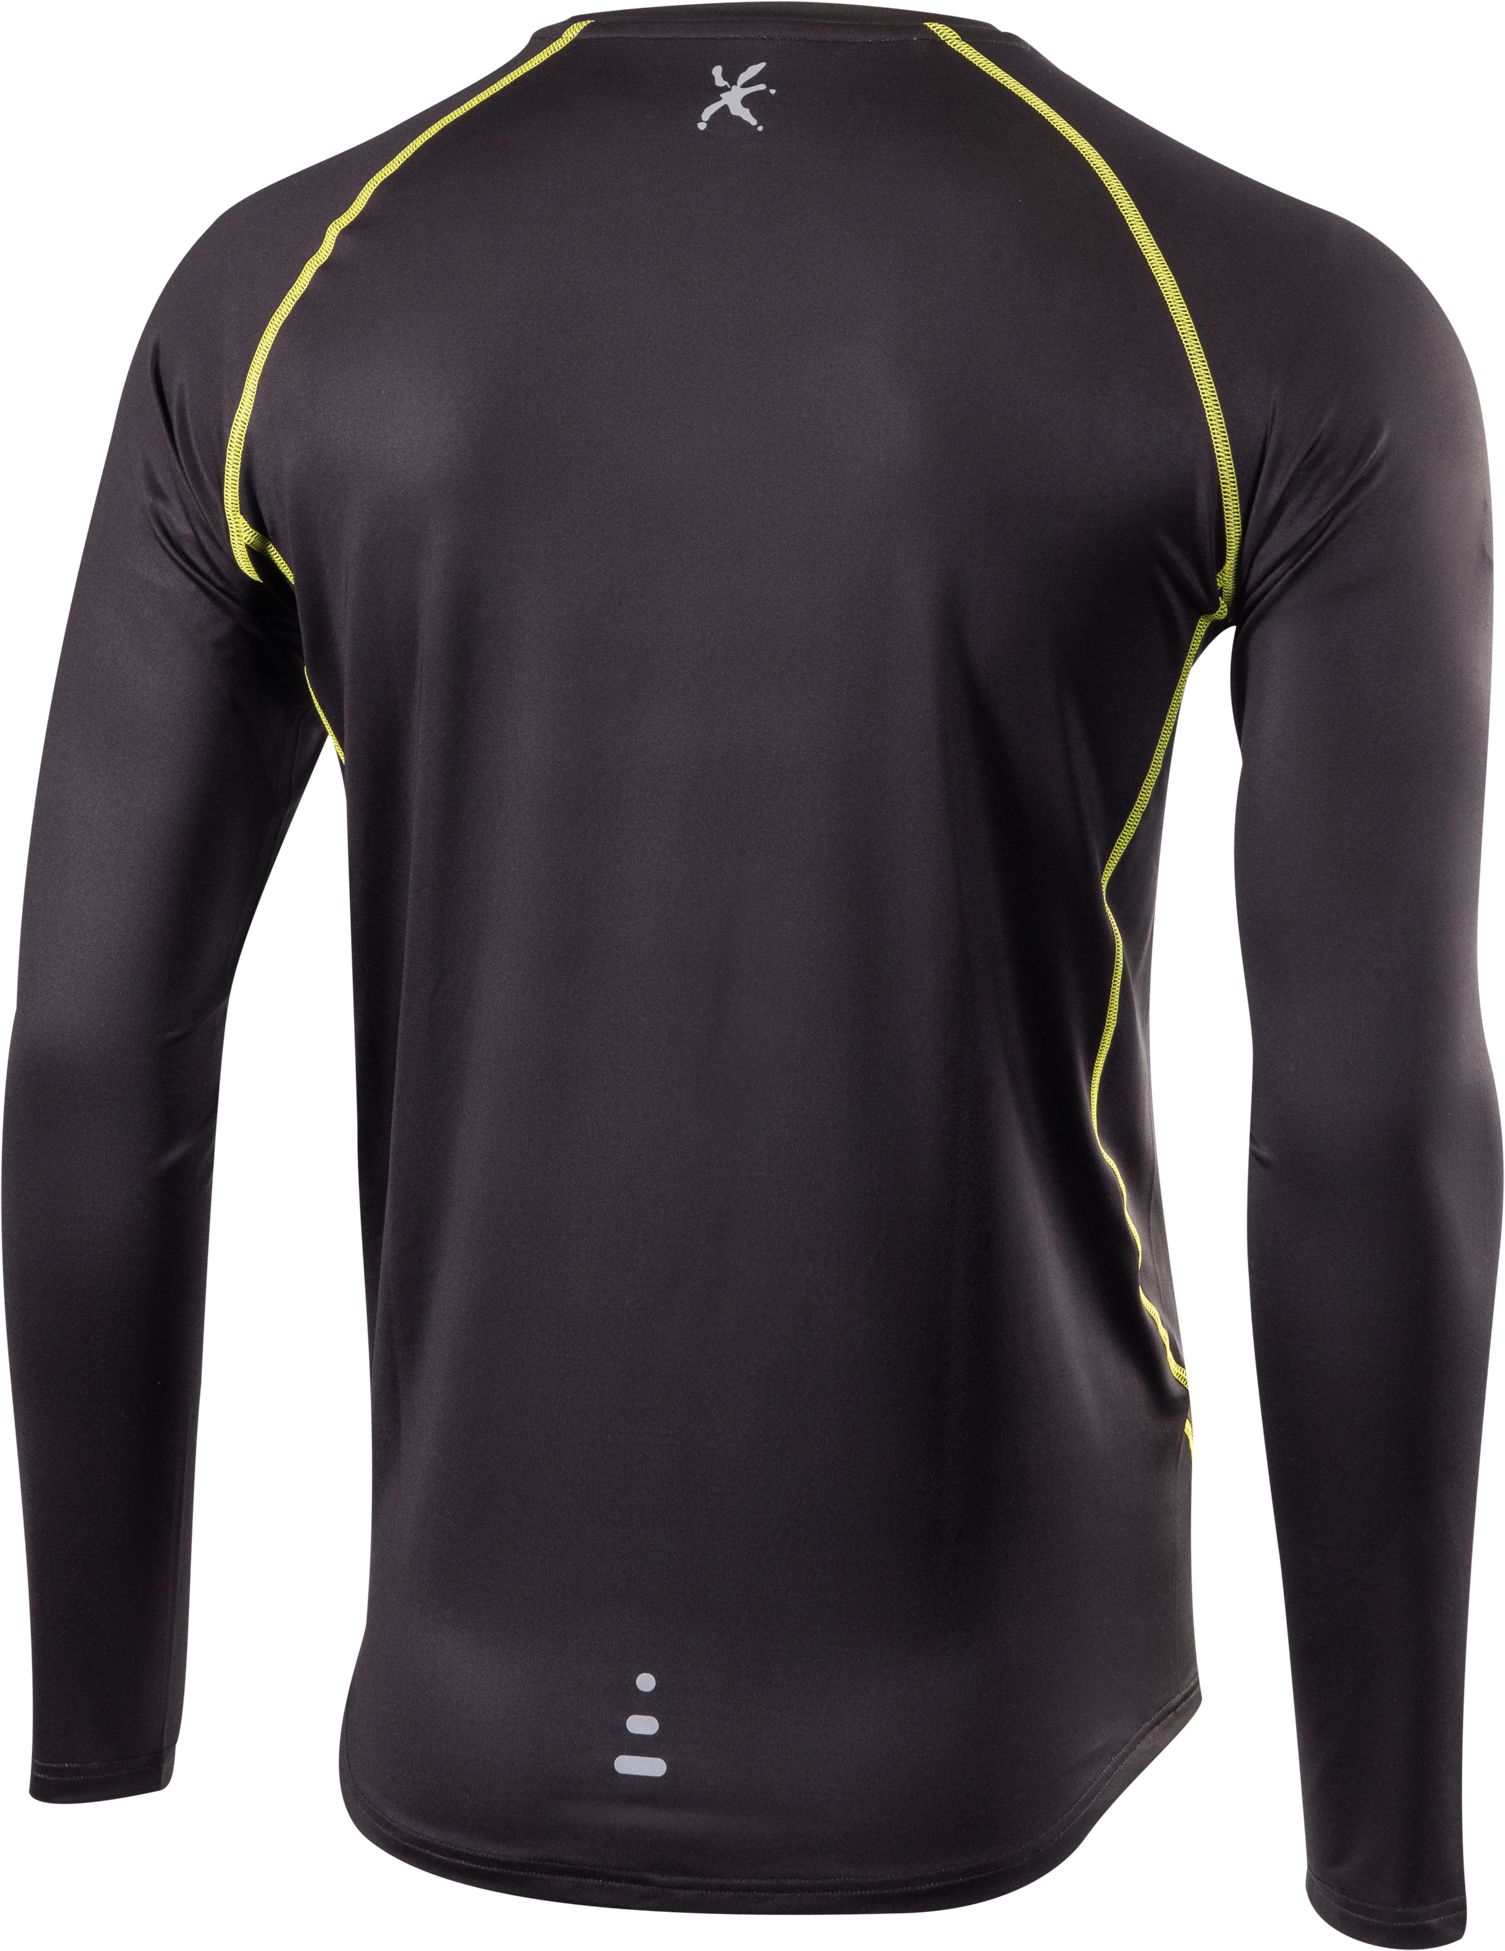 Men's functional T-shirt with long sleeves